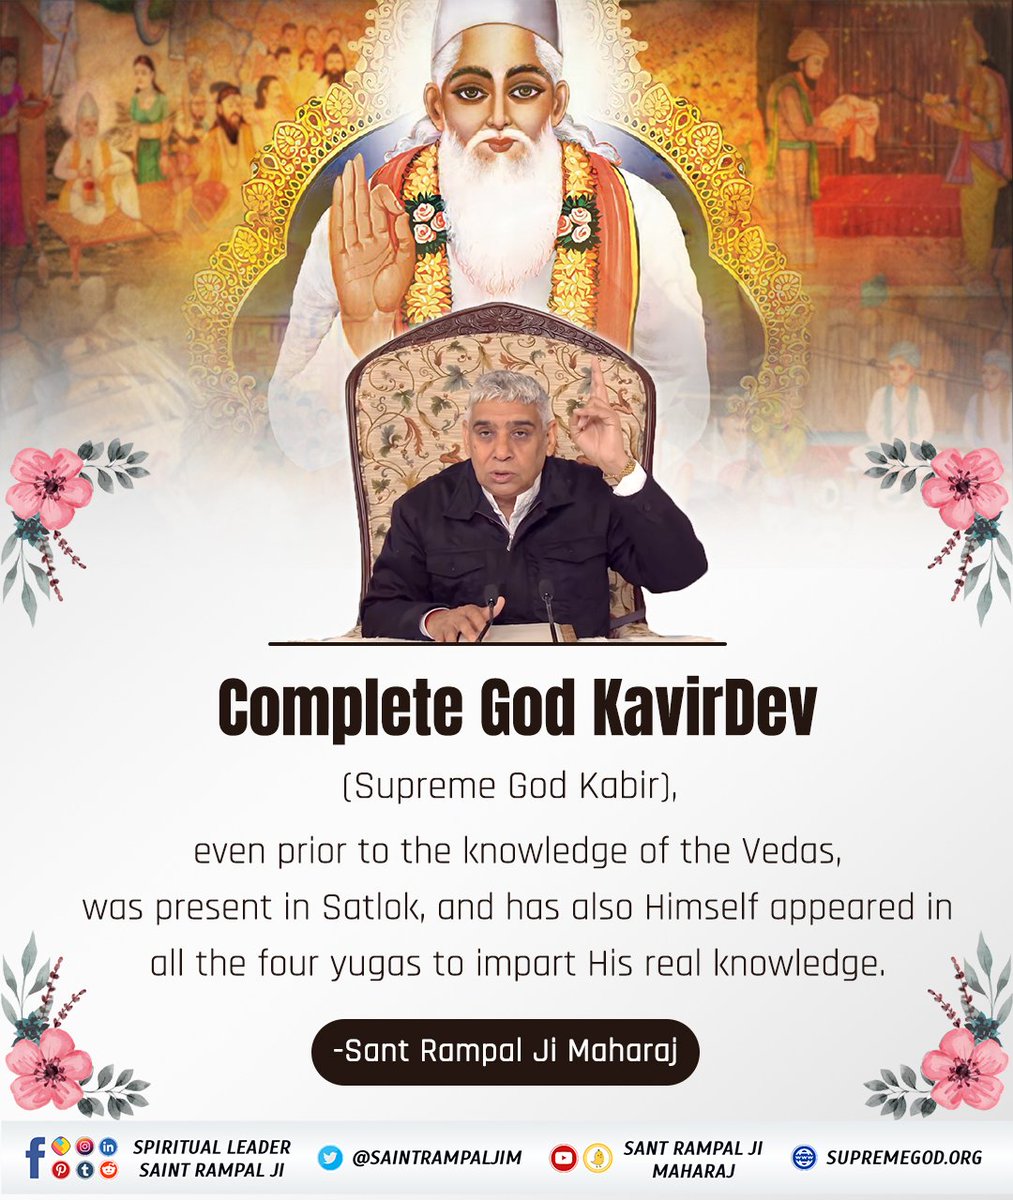 Complete God KabirDev (Supreme God Kabir), even period to the knowledge of the Vedas was present in Satlok, and has also himself appeared in all the four yogas to import his real Knowledge. @SaintRampalJiM #FridayMotivation